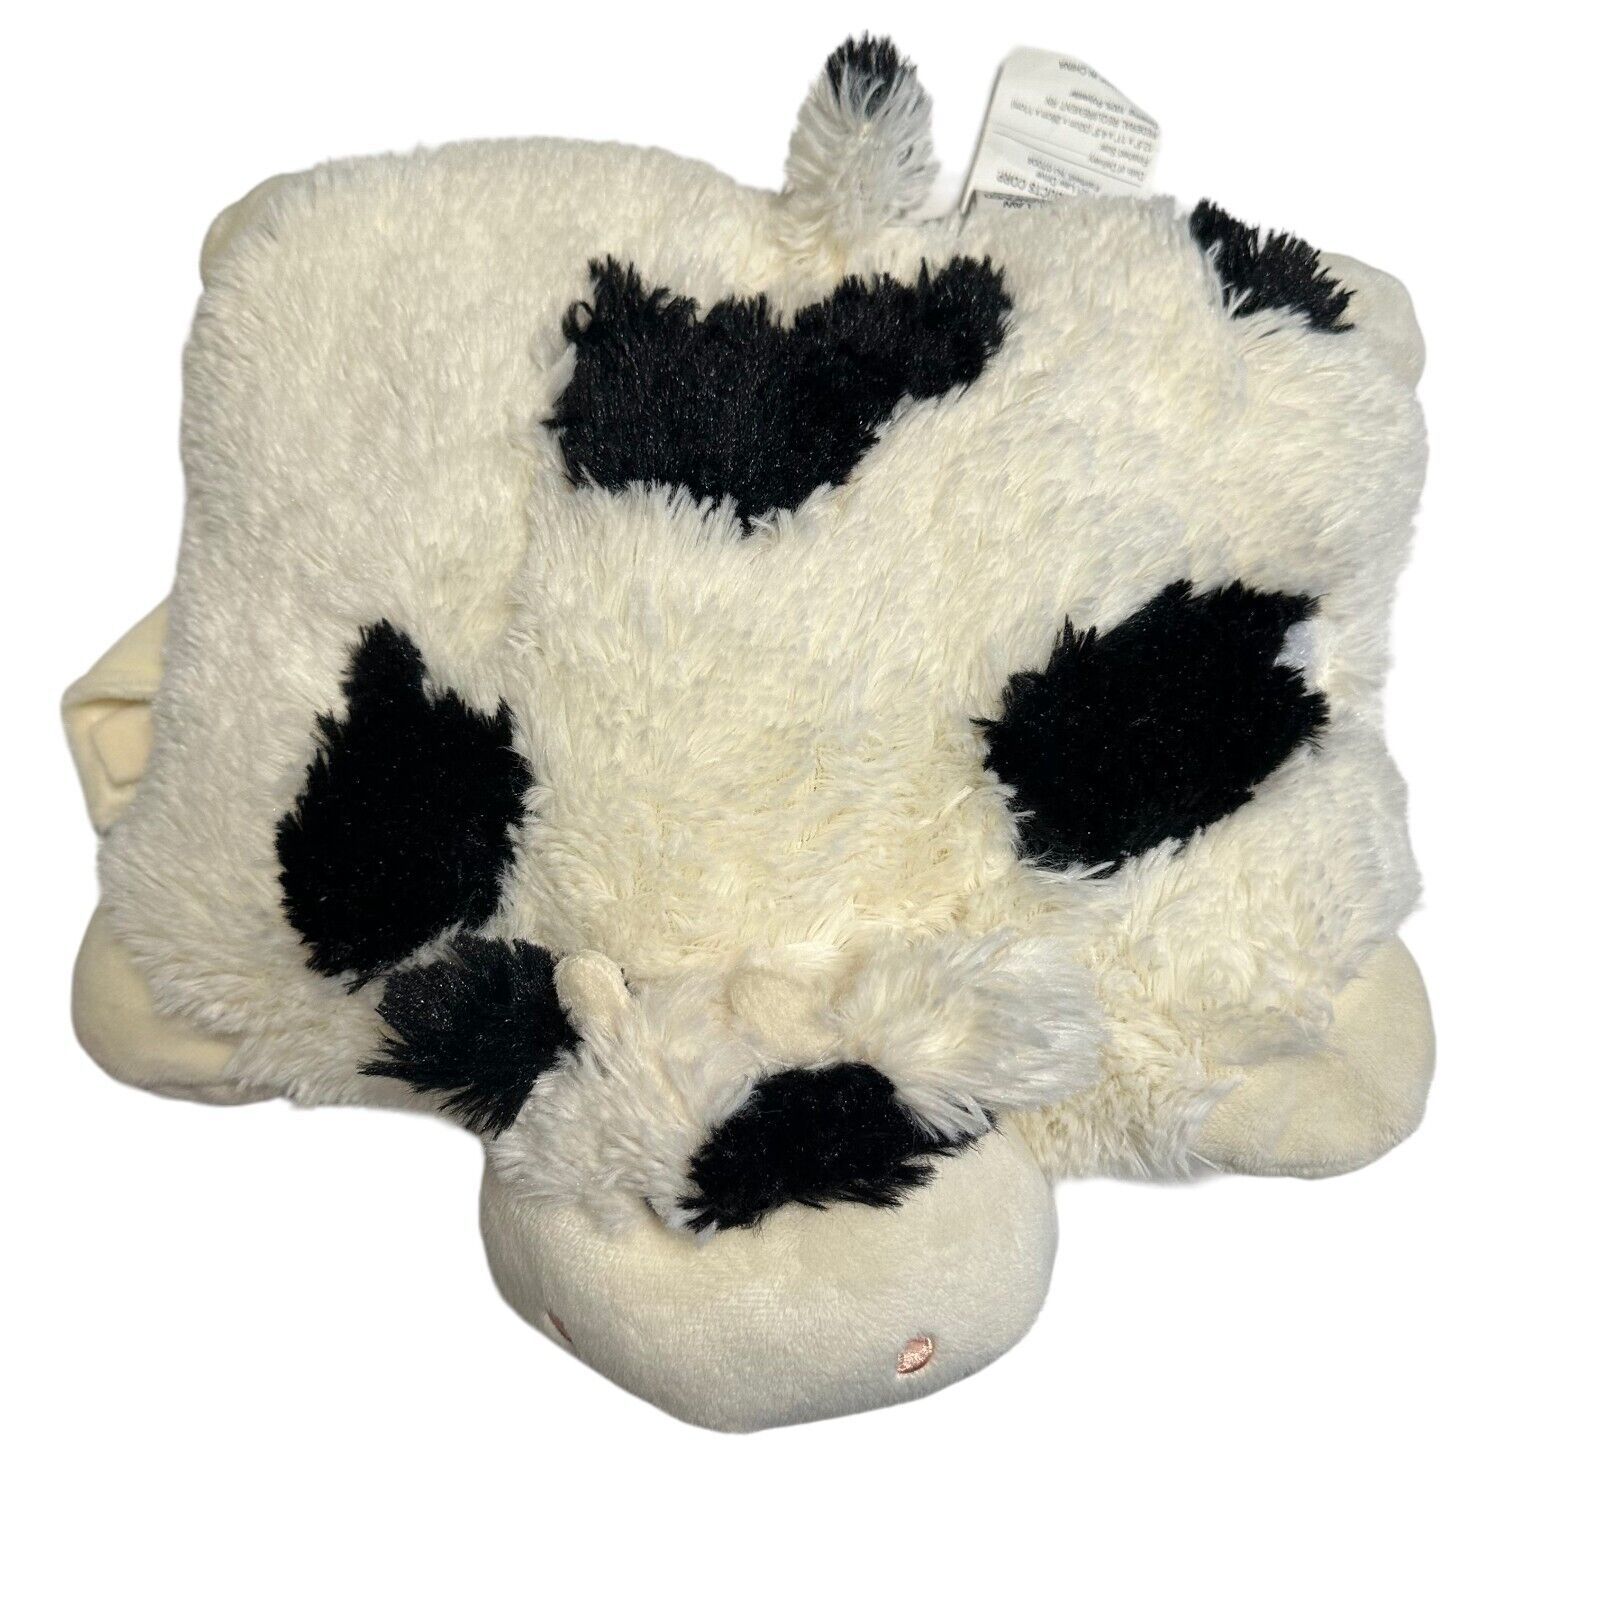 Primary image for Pillow Pets Pee Wees Folding Soft Cozy Cow Plush Stuffed Toy